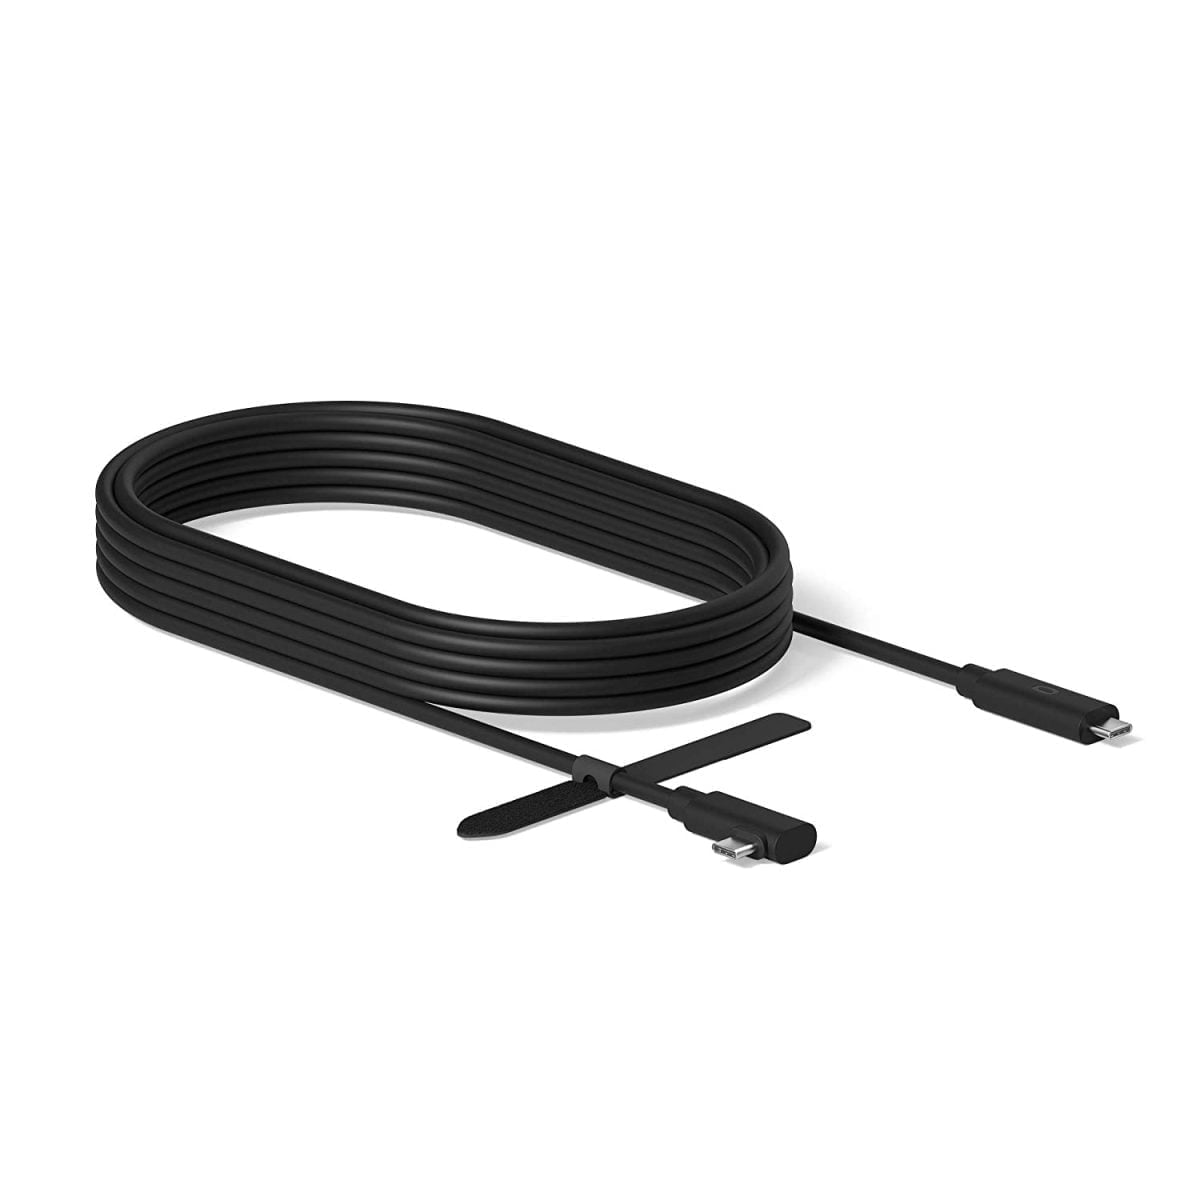 Oculus &Lt;H1&Gt;Oculus Link Virtual Reality Headset Cable For Quest 2 And Quest - 16Ft (5M) - Pc Vr&Lt;/H1&Gt; &Lt;H4 Class=&Quot;A-Size-Base-Plus A-Text-Bold&Quot;&Gt;About This Item&Lt;/H4&Gt; &Lt;Ul Class=&Quot;A-Unordered-List A-Vertical A-Spacing-Mini&Quot;&Gt; &Lt;Li&Gt;&Lt;Span Class=&Quot;A-List-Item&Quot;&Gt;This Premium Fiber-Optic Cable Delivers Exceptional Performance For Pc Vr Gaming On Your Quest And Quest 2 While Simultaneously Powering The Headset&Lt;/Span&Gt;&Lt;/Li&Gt; &Lt;Li&Gt;&Lt;Span Class=&Quot;A-List-Item&Quot;&Gt;Oculus Link Connects Oculus Quest And Quest 2 To A Gaming Pc, Giving You Access To A Wide Range Of Oculus Rift Apps And Games&Lt;/Span&Gt;&Lt;/Li&Gt; &Lt;Li&Gt;&Lt;Span Class=&Quot;A-List-Item&Quot;&Gt;Optimal Length Reaches 16 Feet (5M), Providing A Best-In-Class Experience With Flexible, Lightweight Durability&Lt;/Span&Gt;&Lt;/Li&Gt; &Lt;Li&Gt;&Lt;Span Class=&Quot;A-List-Item&Quot;&Gt;High-Quality Spiral Shielding Doubles As Grounding And Ensures A Consistent And Robust Connection&Lt;/Span&Gt;&Lt;/Li&Gt; &Lt;Li&Gt;&Lt;Span Class=&Quot;A-List-Item&Quot;&Gt;Made For Oculus Quest And Quest 2 Vr Headsets&Lt;/Span&Gt;&Lt;/Li&Gt; &Lt;Li&Gt;&Lt;Span Class=&Quot;A-List-Item&Quot;&Gt;Compatible Gaming Pc Required, Not Included. See Oculus Website For Pc Compatibility Specifications.&Lt;/Span&Gt;&Lt;/Li&Gt; &Lt;Li&Gt;&Lt;Span Class=&Quot;A-List-Item&Quot;&Gt;Facebook Account Required&Lt;/Span&Gt;&Lt;/Li&Gt; &Lt;Li&Gt;&Lt;Span Class=&Quot;A-List-Item&Quot;&Gt;Requires Wireless Internet Access And The Oculus App (Free Download) For Setup&Lt;/Span&Gt;&Lt;/Li&Gt; &Lt;/Ul&Gt; Oculus Link Virtual Reality Headset Cable For Quest 2 And Quest - 16Ft (5M) - Pc Vr